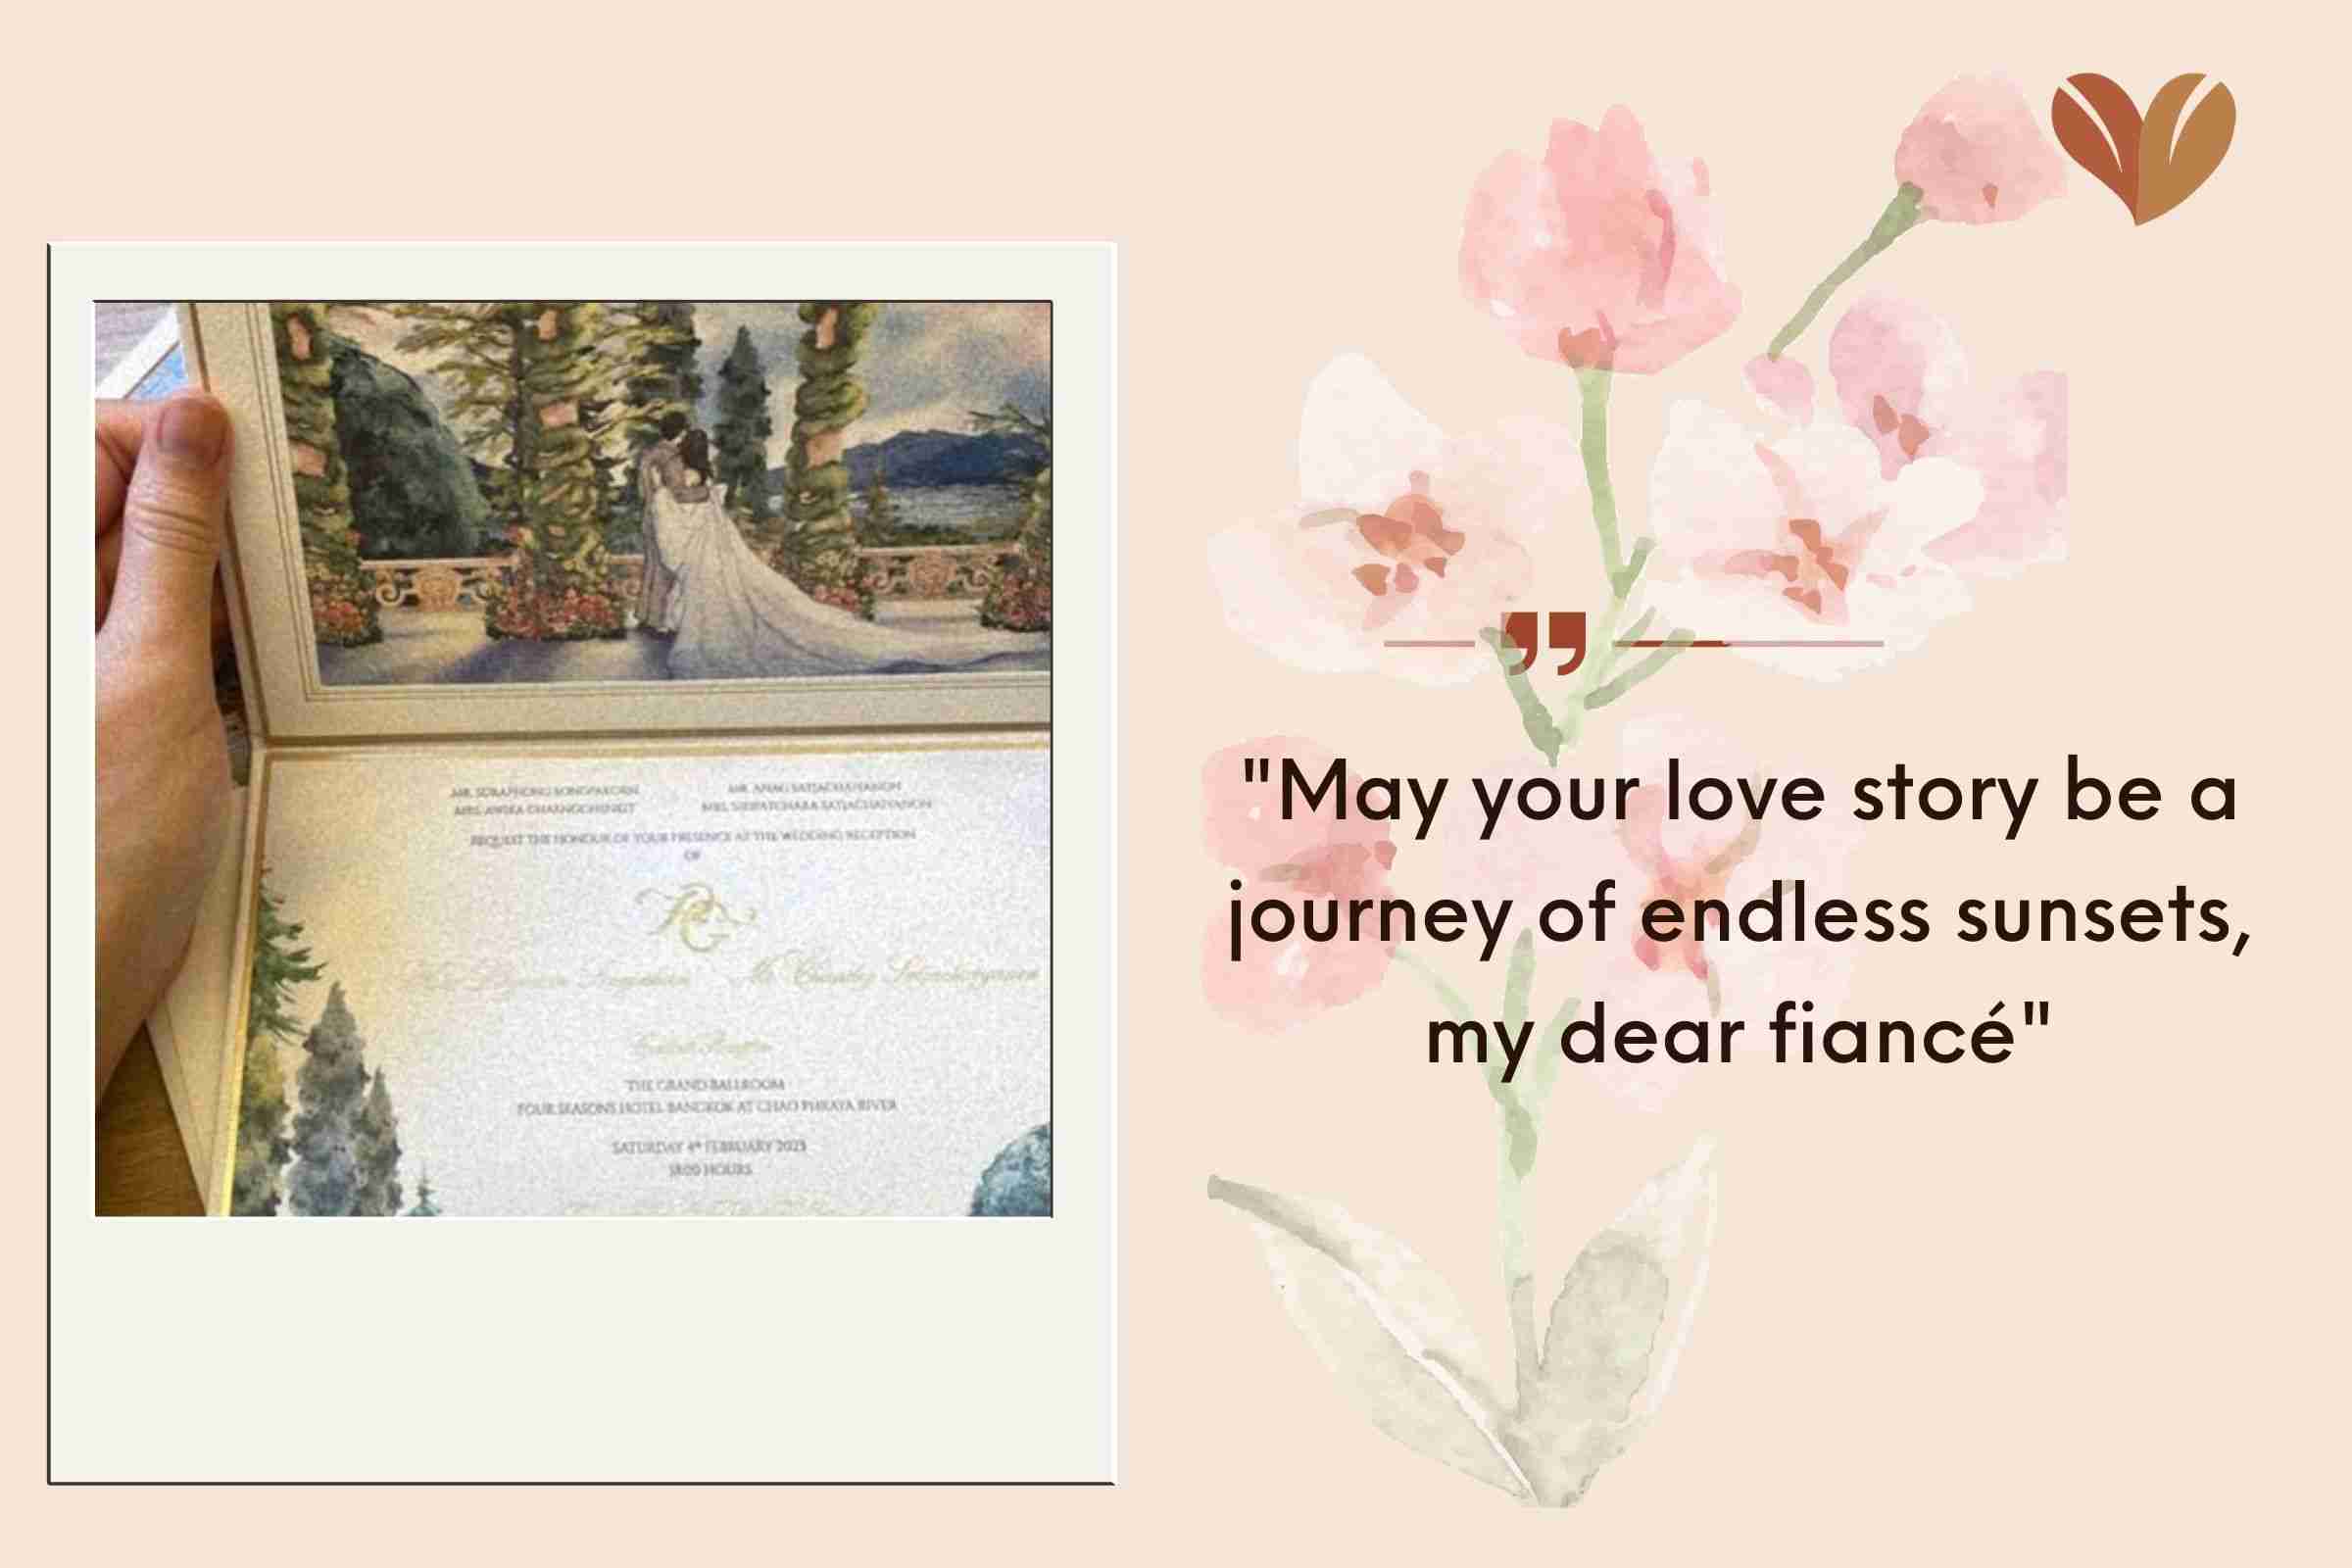 "May your love story be a journey of endless sunsets, my dear fiancé"